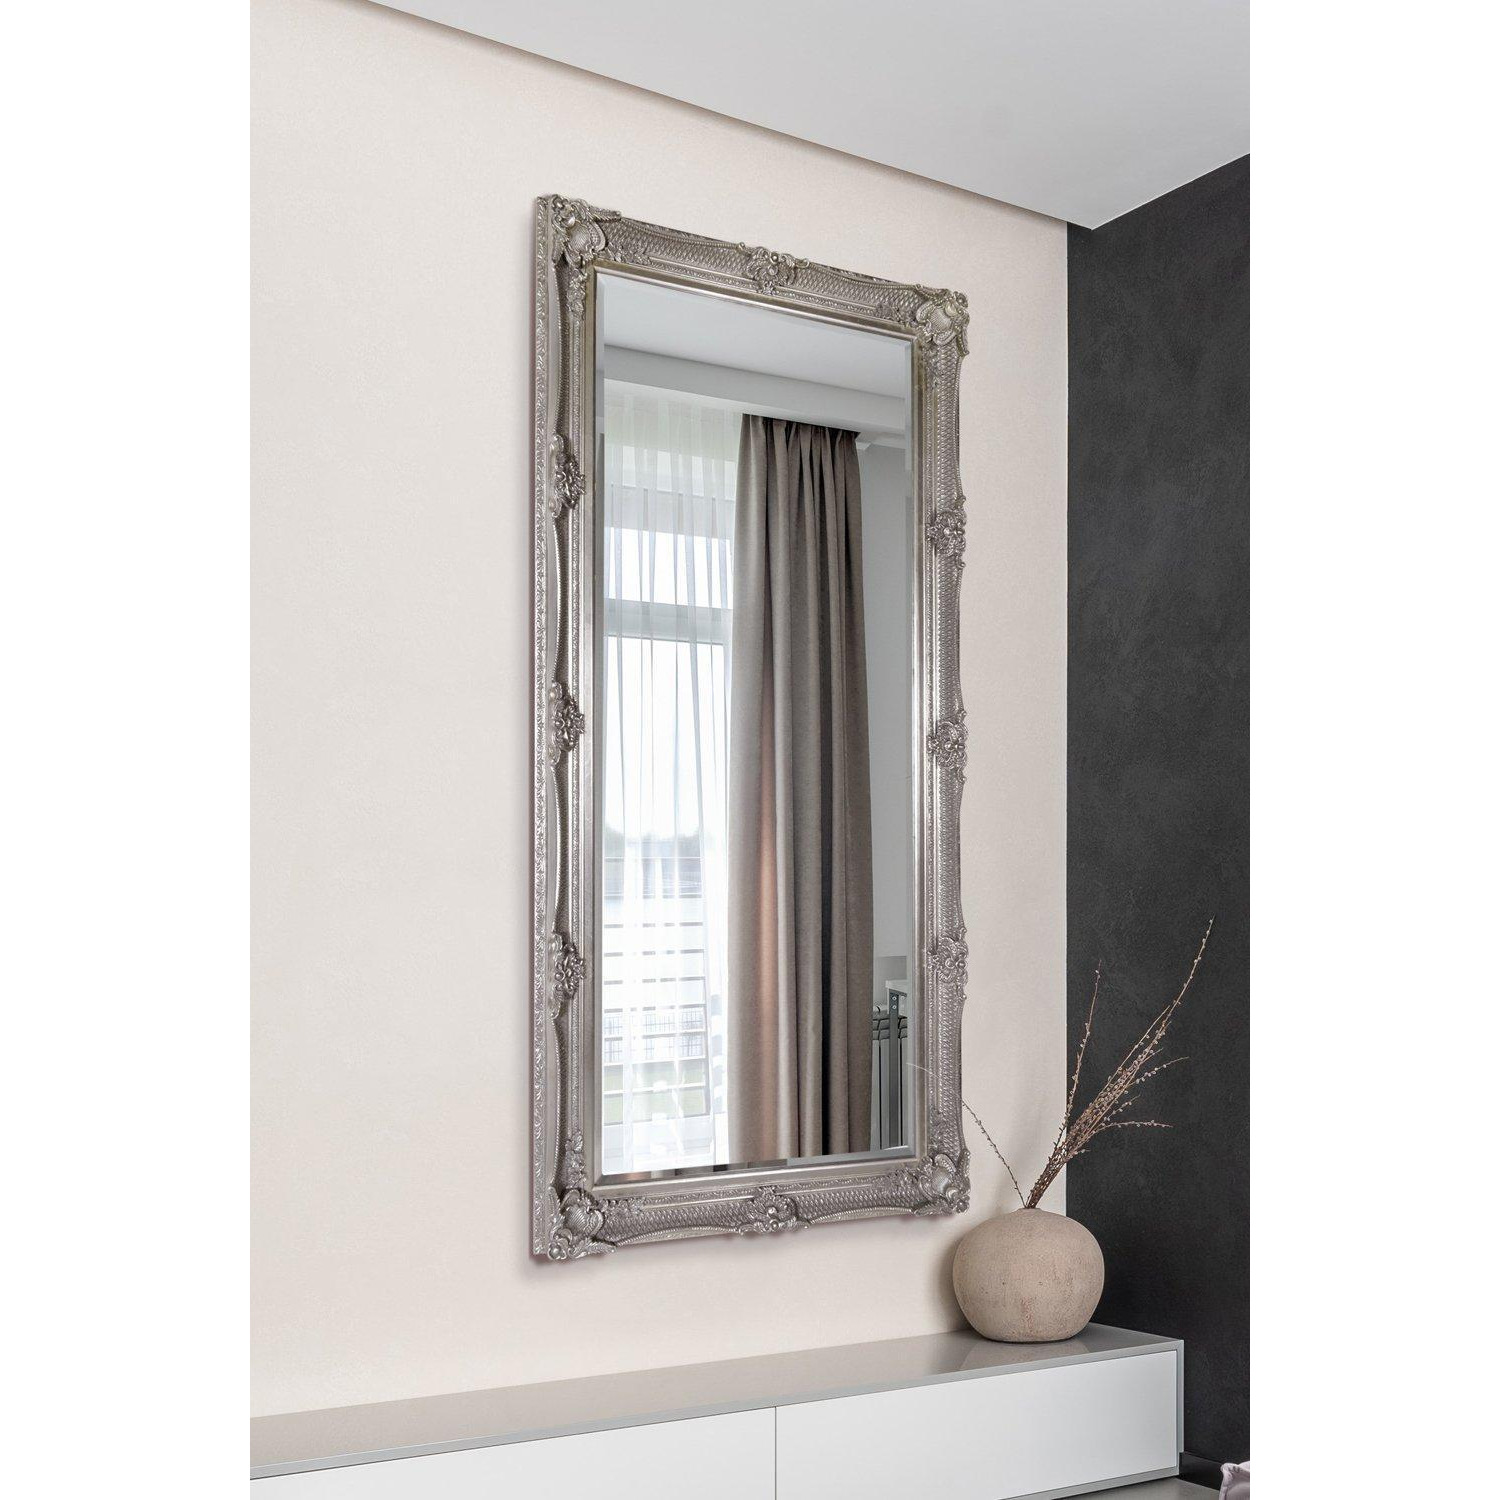 'Abbey' Full Length Silver Decorative Ornate Leaner Wall Mirror 5Ft5 X 2Ft7 (168cm X 78cm) - image 1